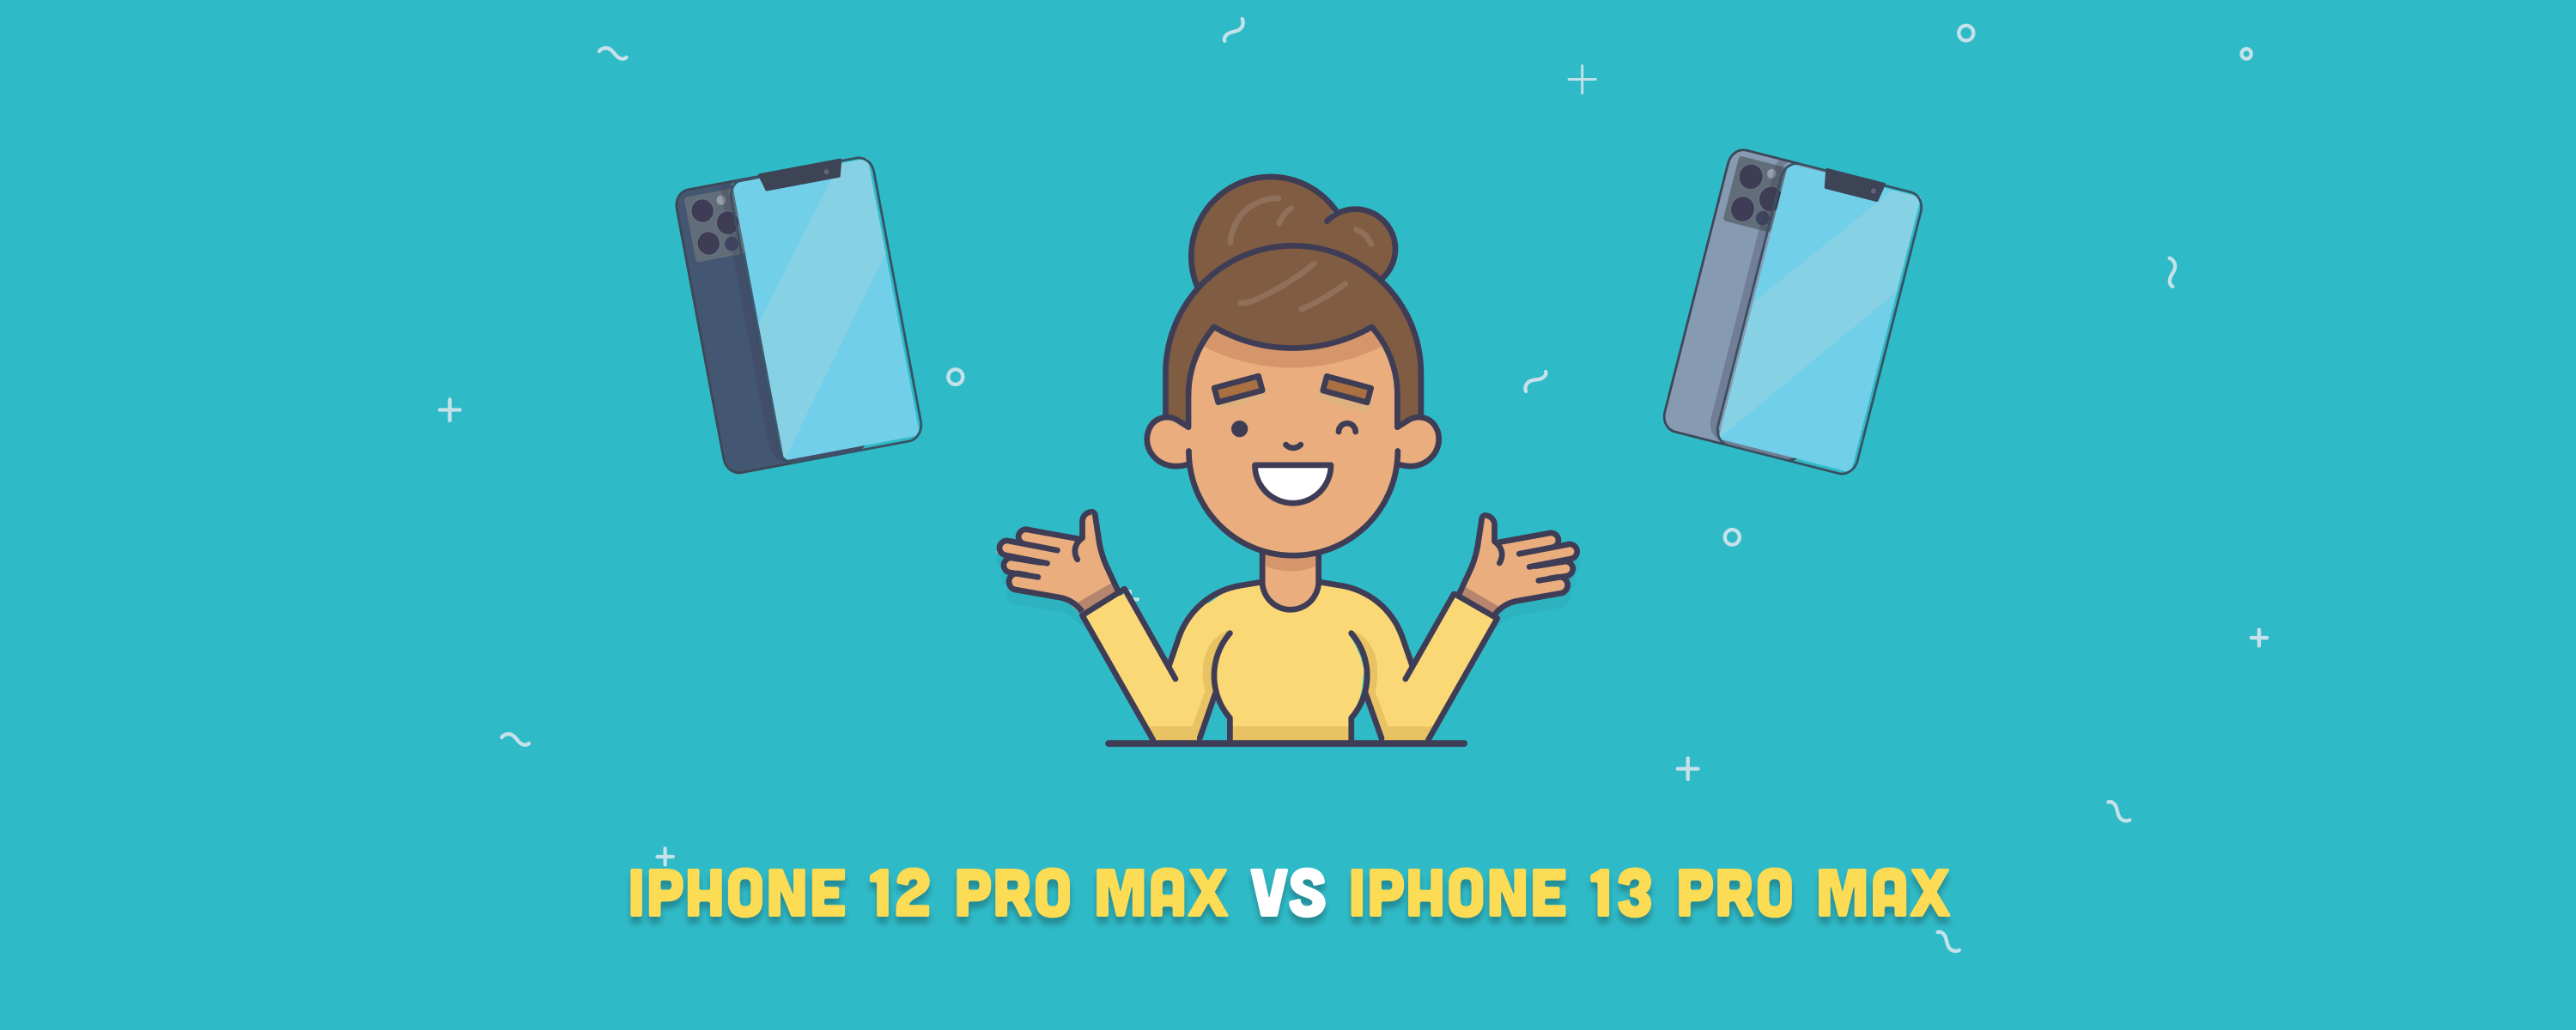 iPhone 12 Pro Max vs. iPhone 13 Pro Max: Which One to Choose?